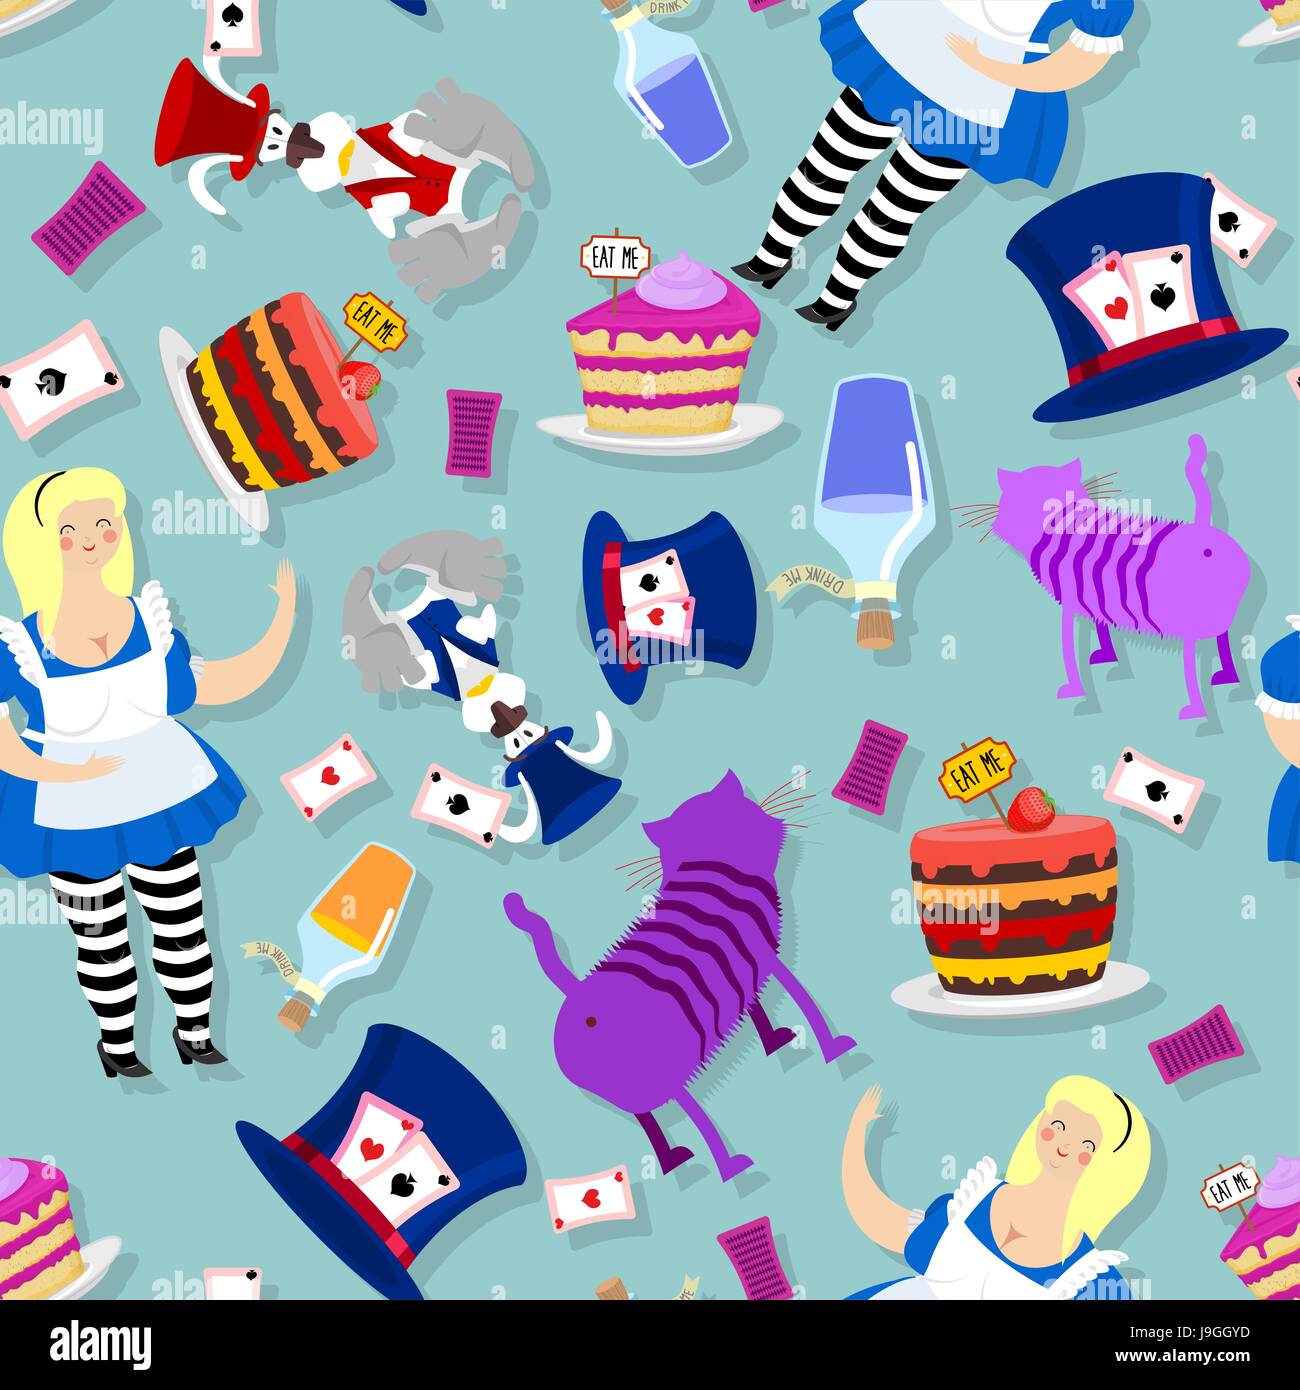 Alice in Wonderland pattern. Fat woman and Cheshire cat. Rabbit in hat. Cylinder is Mad Hatter. Magic Potion and piece of cake Stock Vector